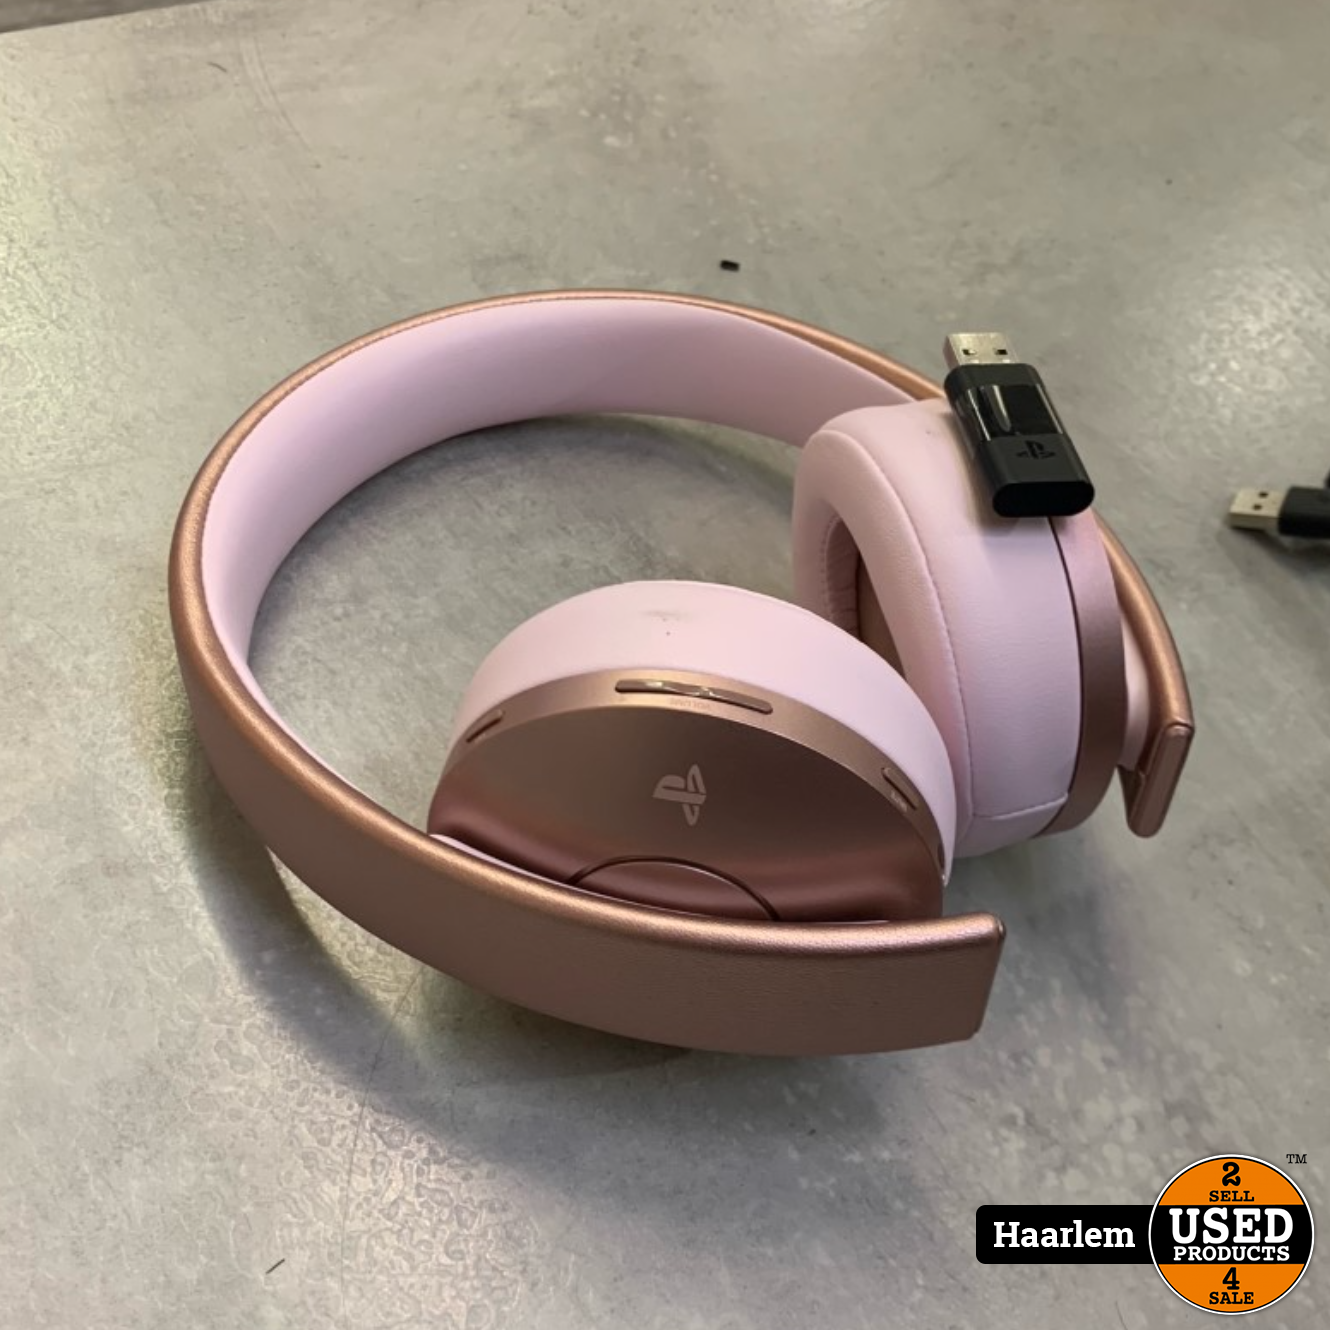 hebzuchtig Onbekwaamheid offset sony Sony gaming headset PS4 Gold 7.1 Wireless Headset (Rose goud) - Used  Products Haarlem Cronjéstraat